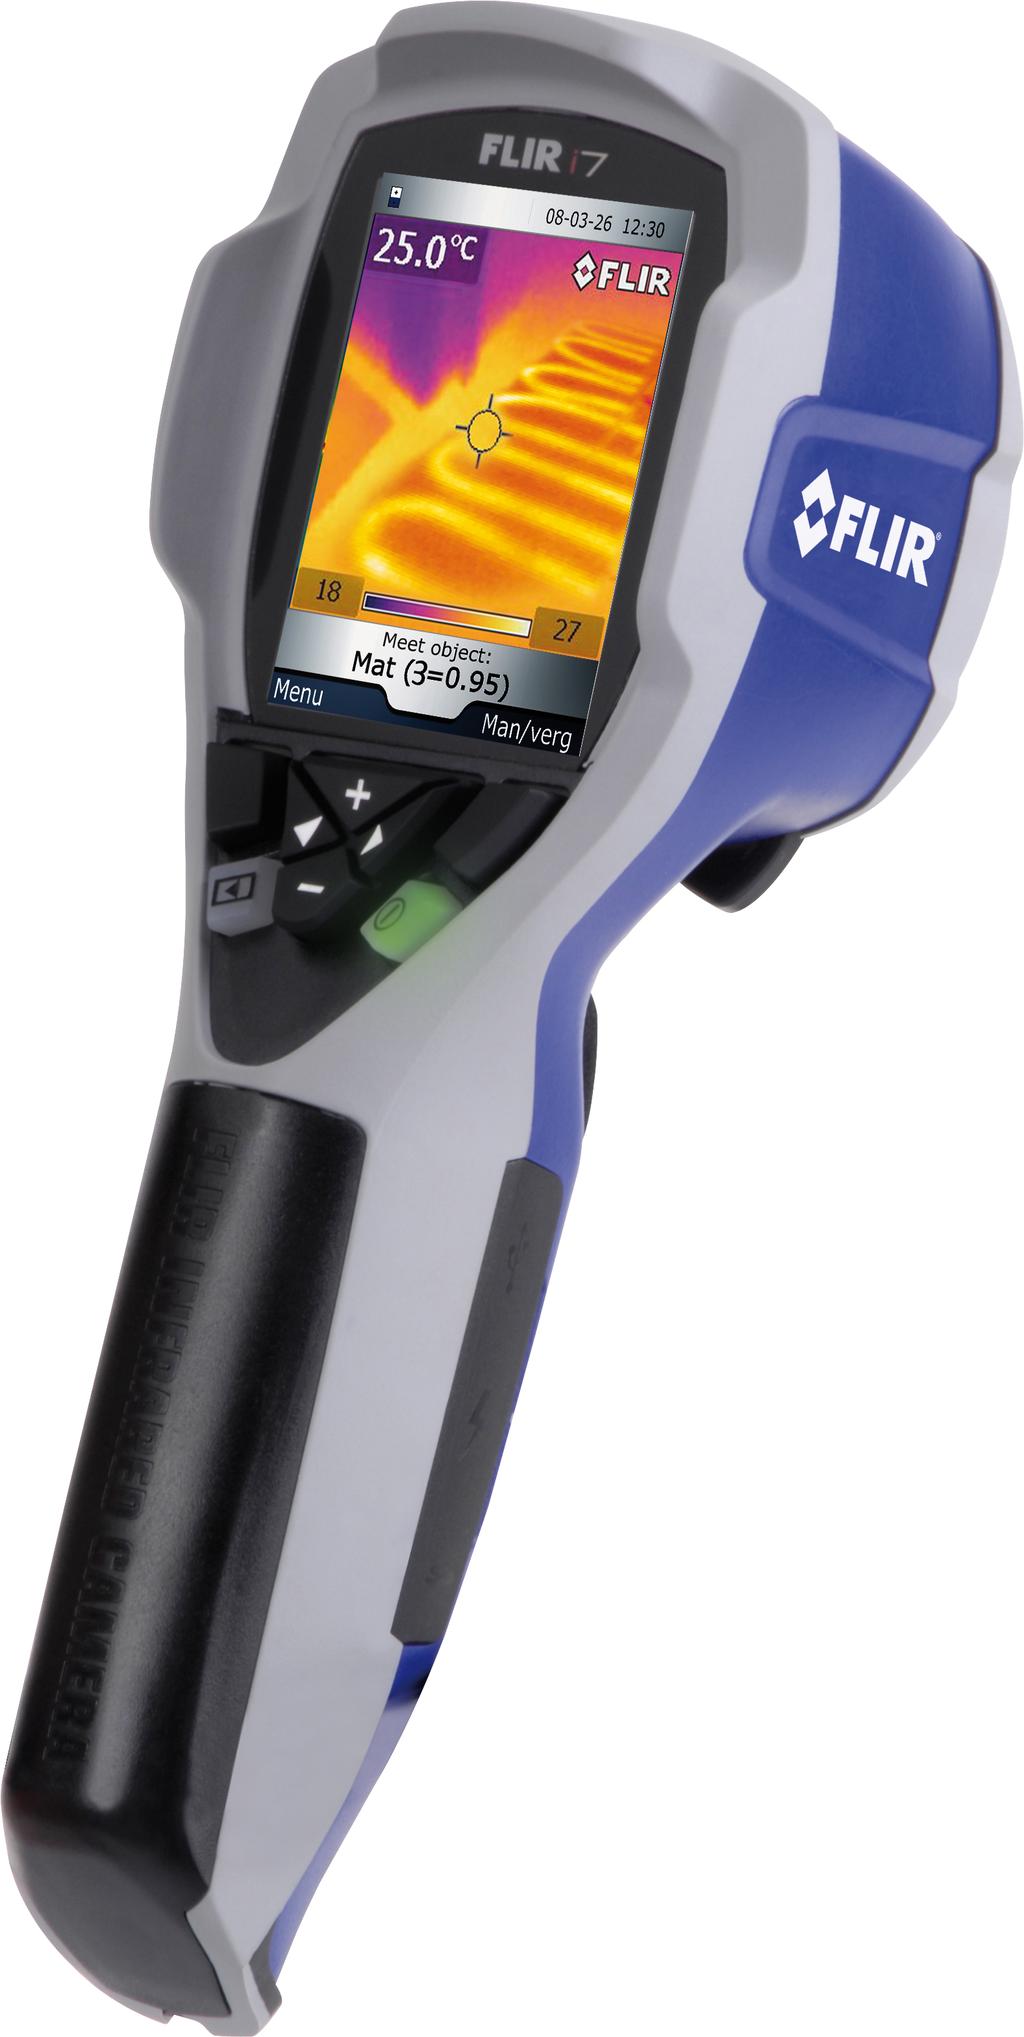 Technical Data FLIR i7 Part number: 39301-0305 Copyright Names and marks appearing herein are either registered trademarks or trademarks of FLIR Systems and/or its subsidiaries.